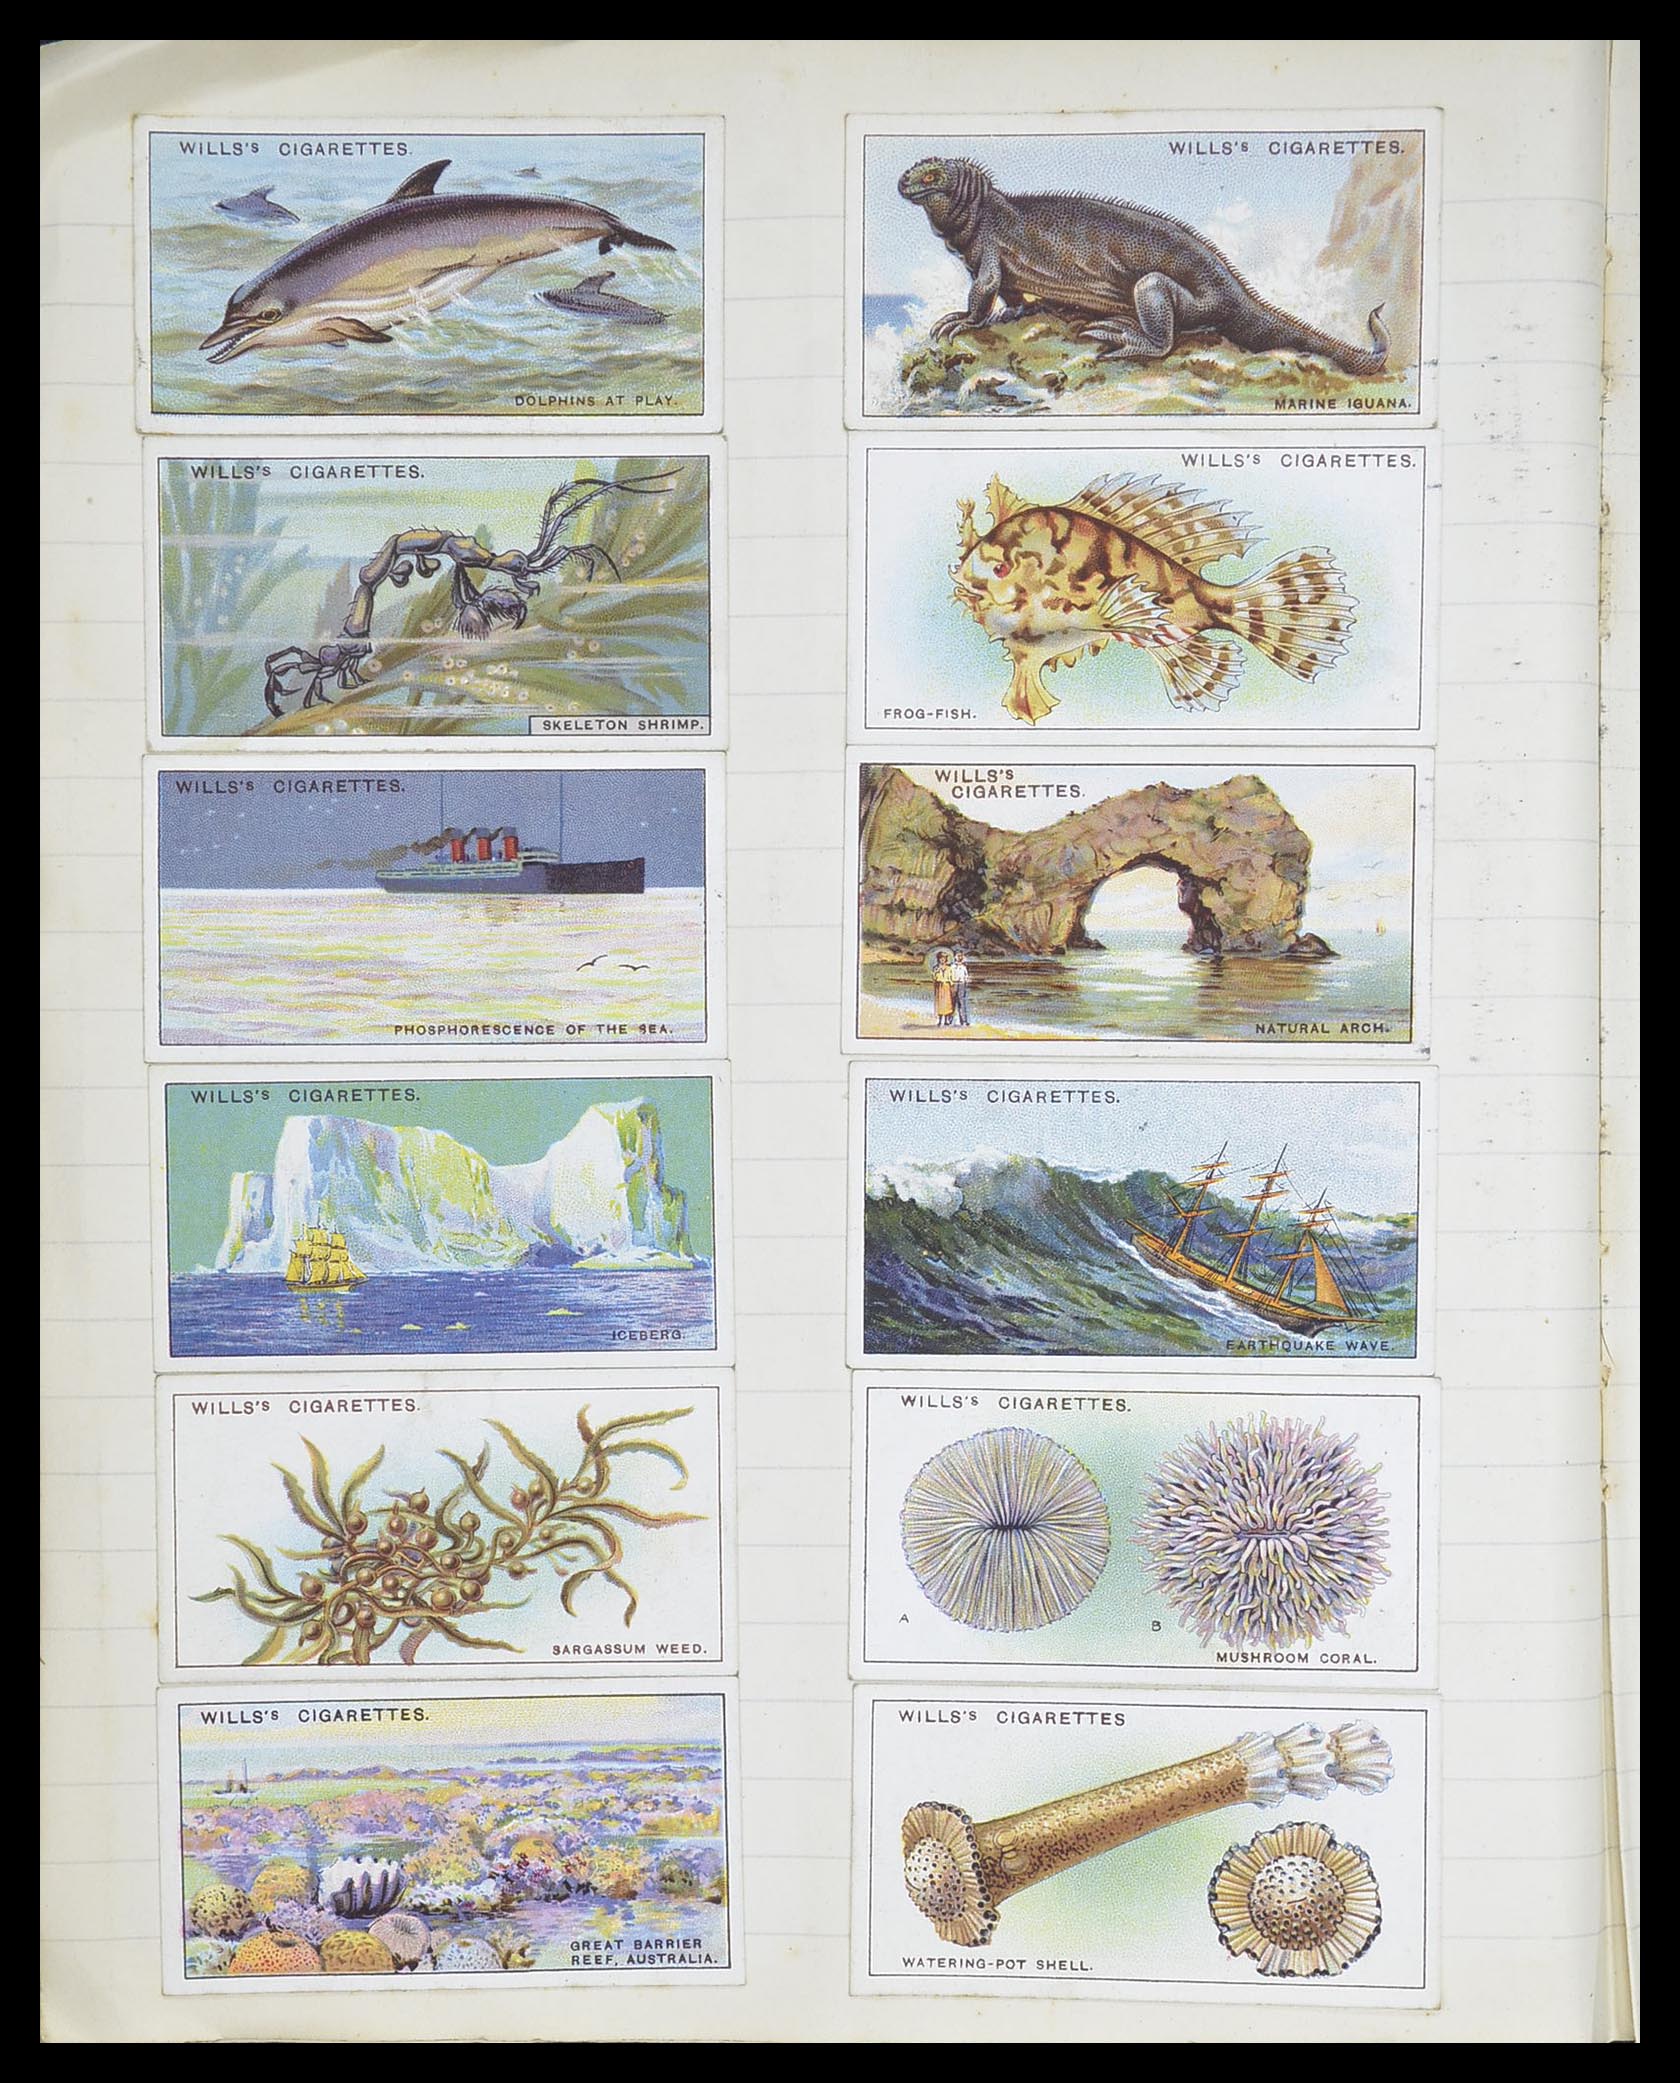 33444 092 - Stamp collection 33444 Great Britain cigarette cards.